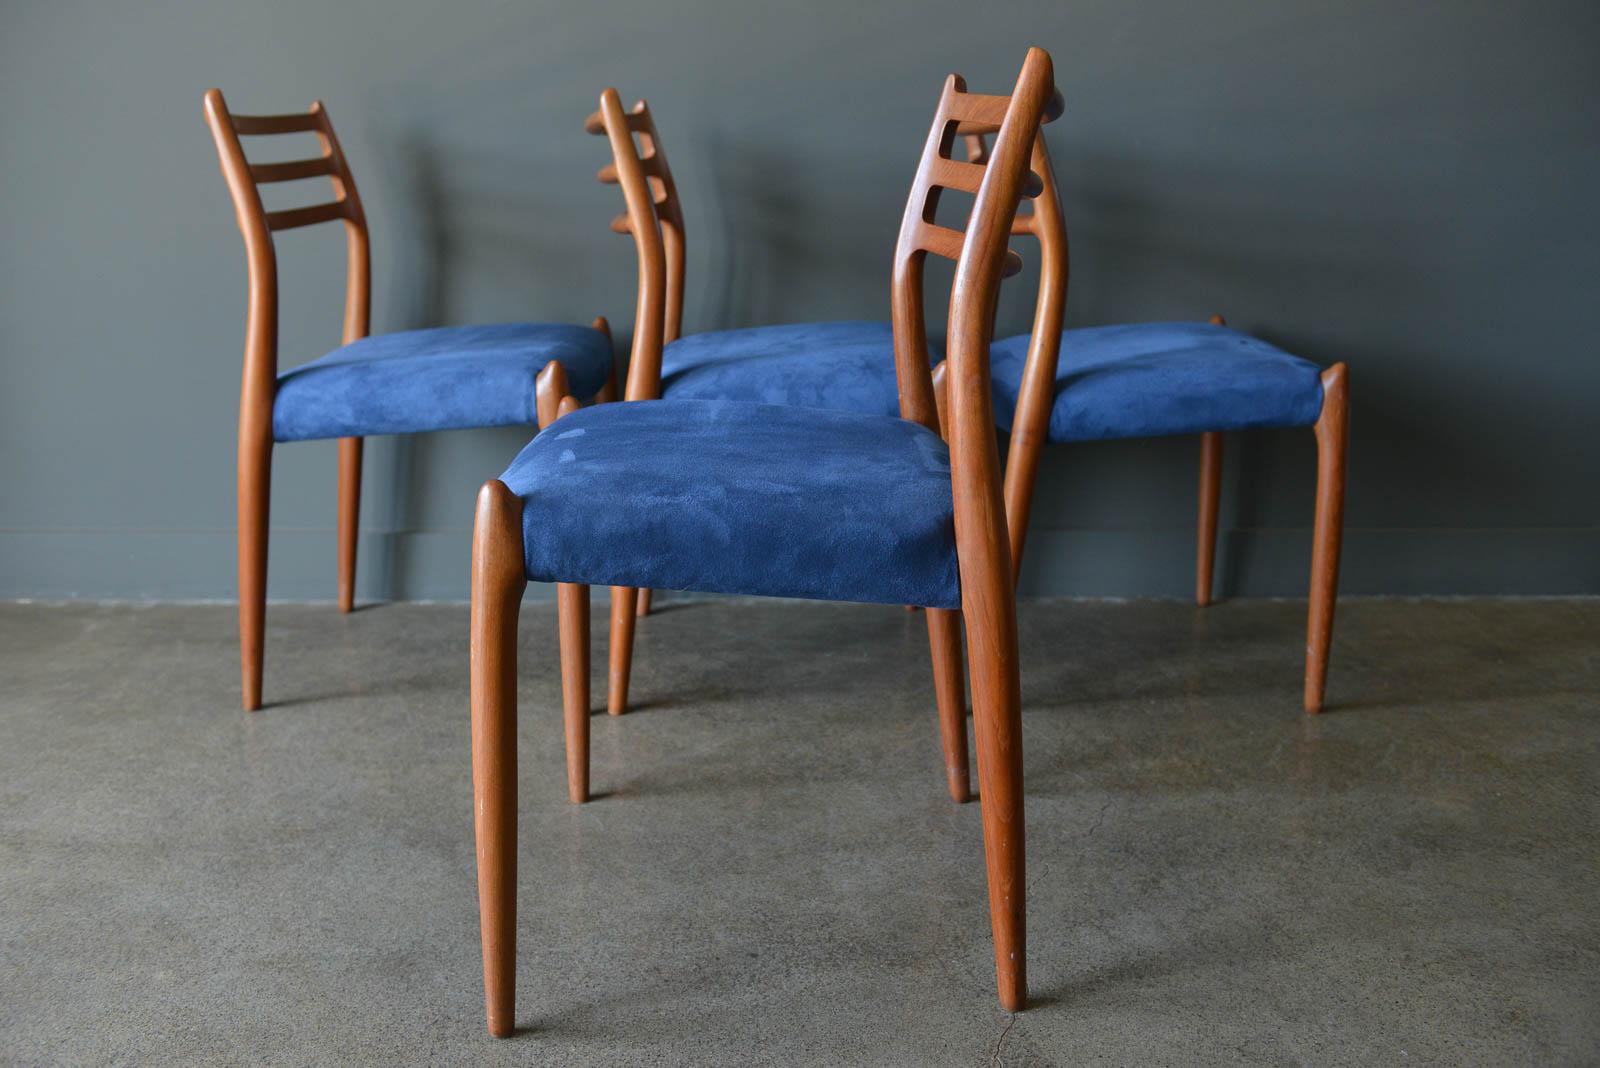 Niels Moller Model 78 teak dining chairs, set of 4, circa 1960. Probably the most desirable of the Moller styles, this is model 78 dining chair with sculpted teak frame and beautiful curved backrest. Seats are covered in a blue micro-suede, which